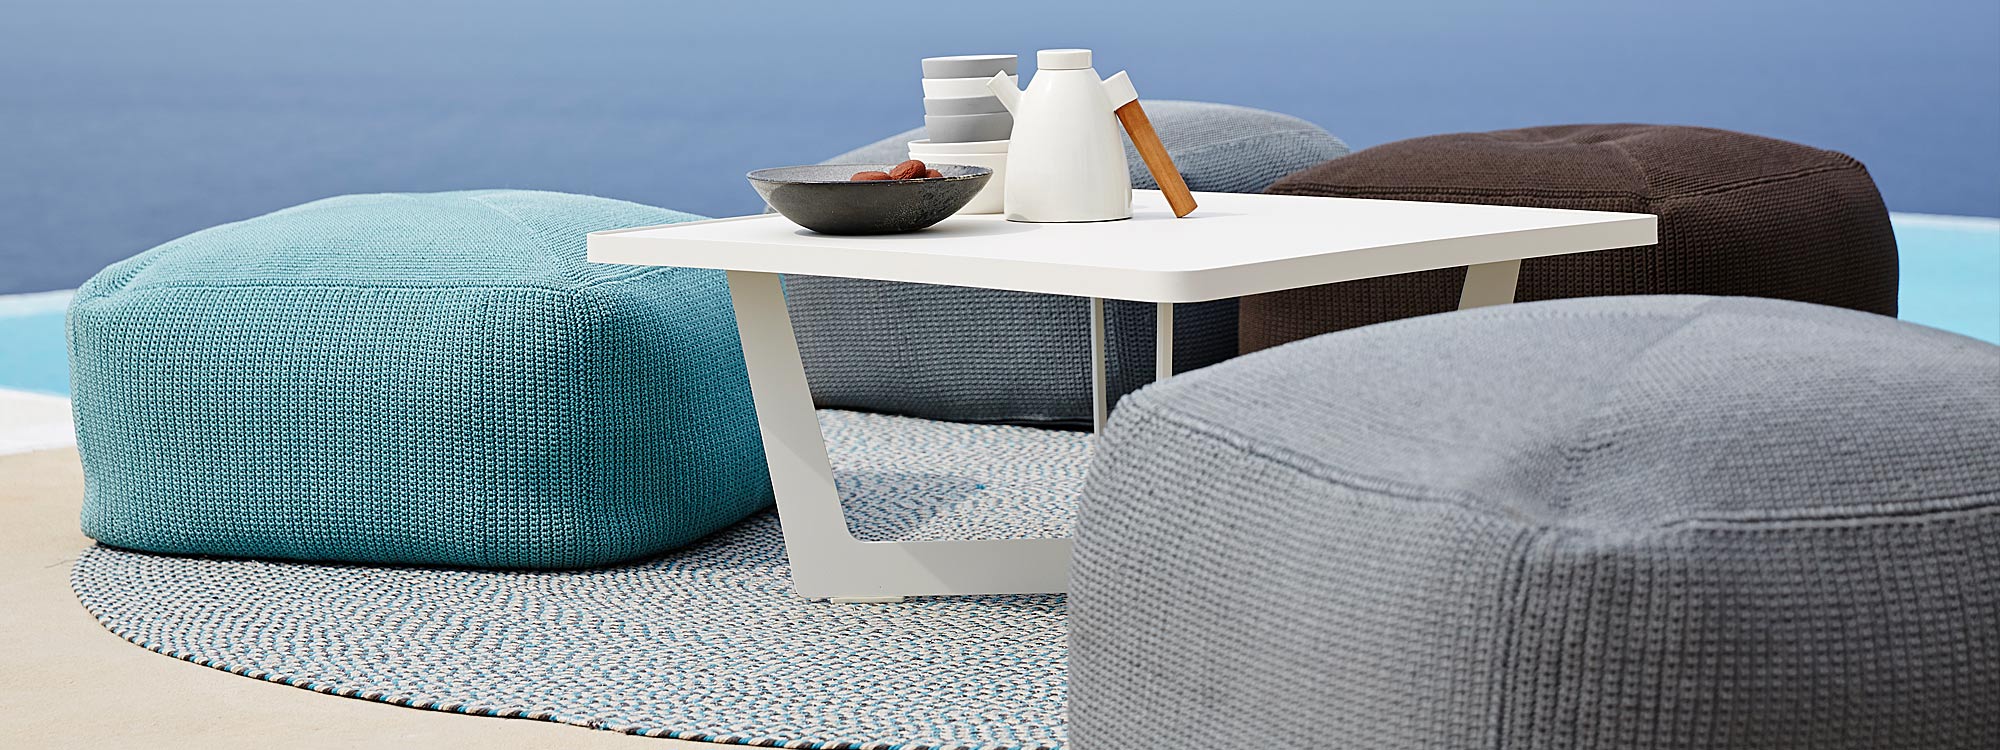 Image of Caneline Divine garden poufs in 3 different colors, together with Time Out white garden coffee table